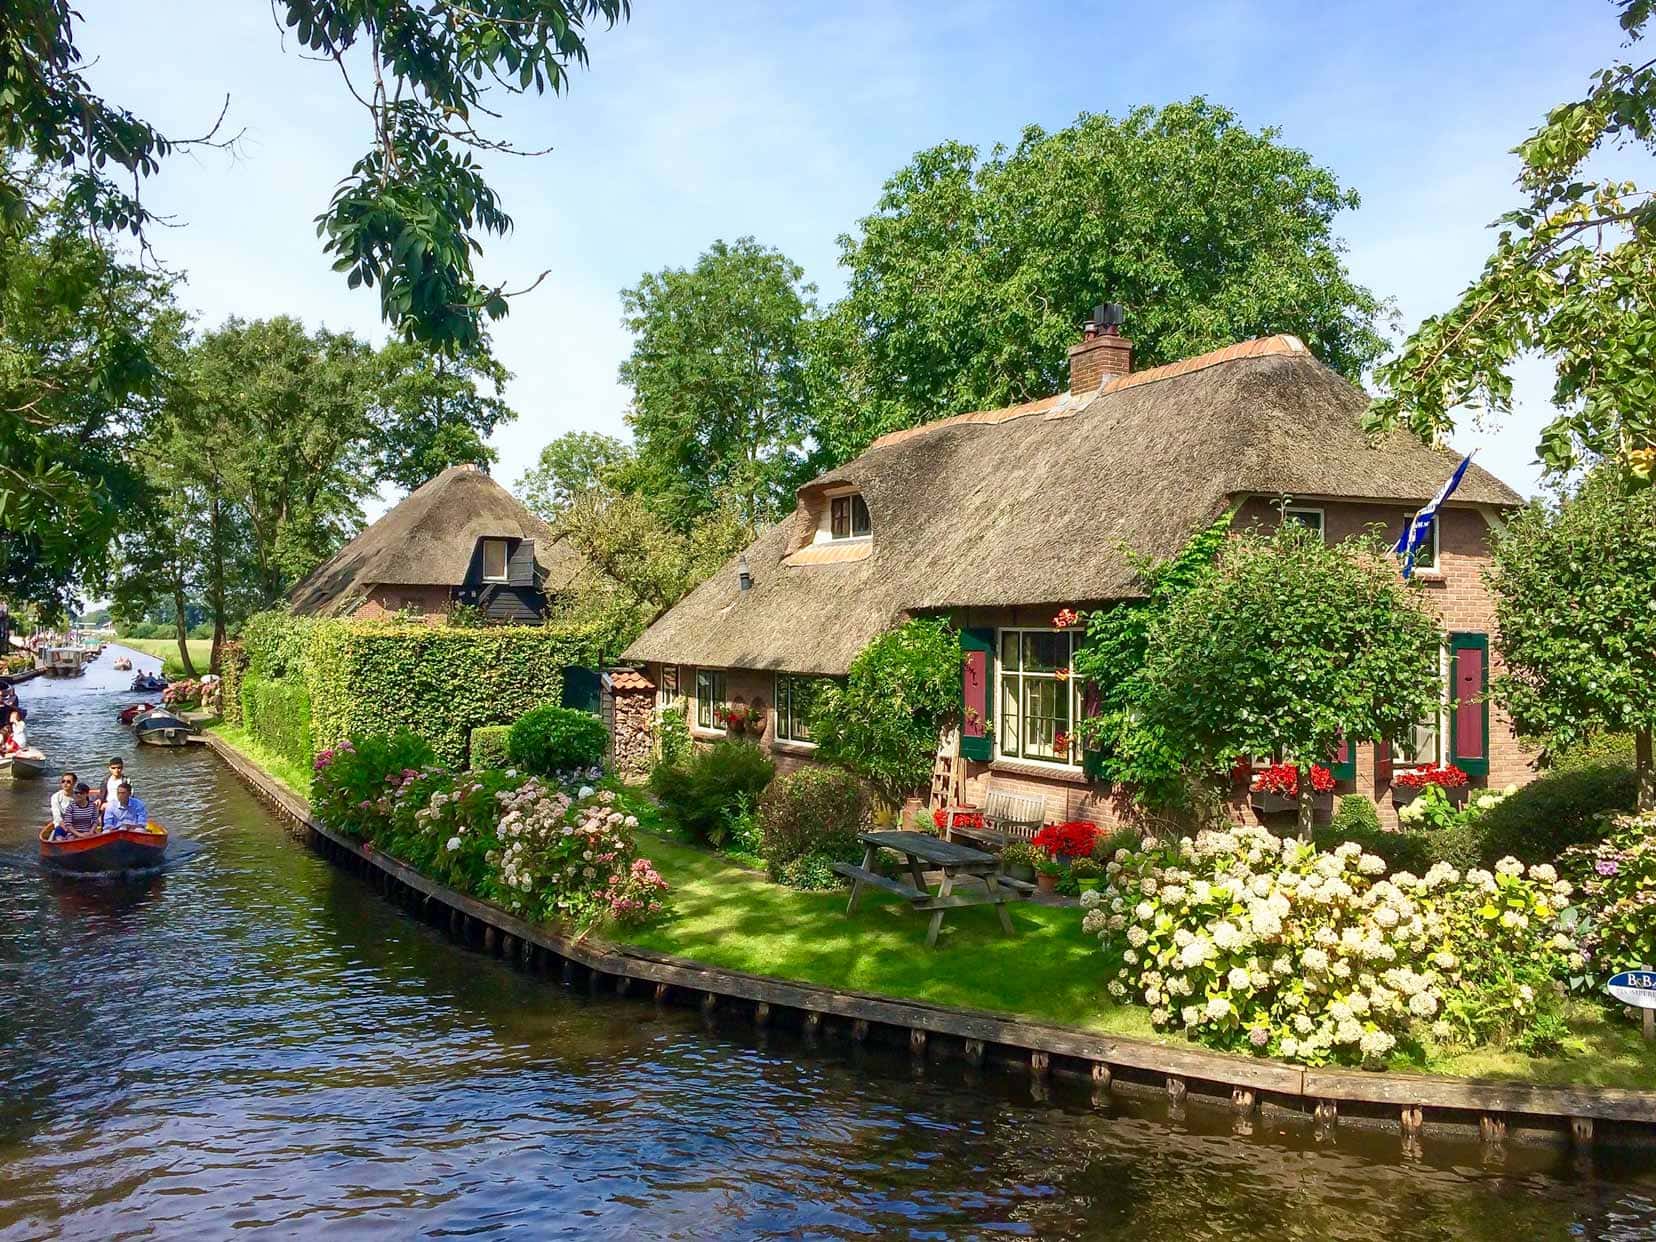 Pretty thatched cottage on the banks of a small canal with lots of flowers and bushes growing around it 